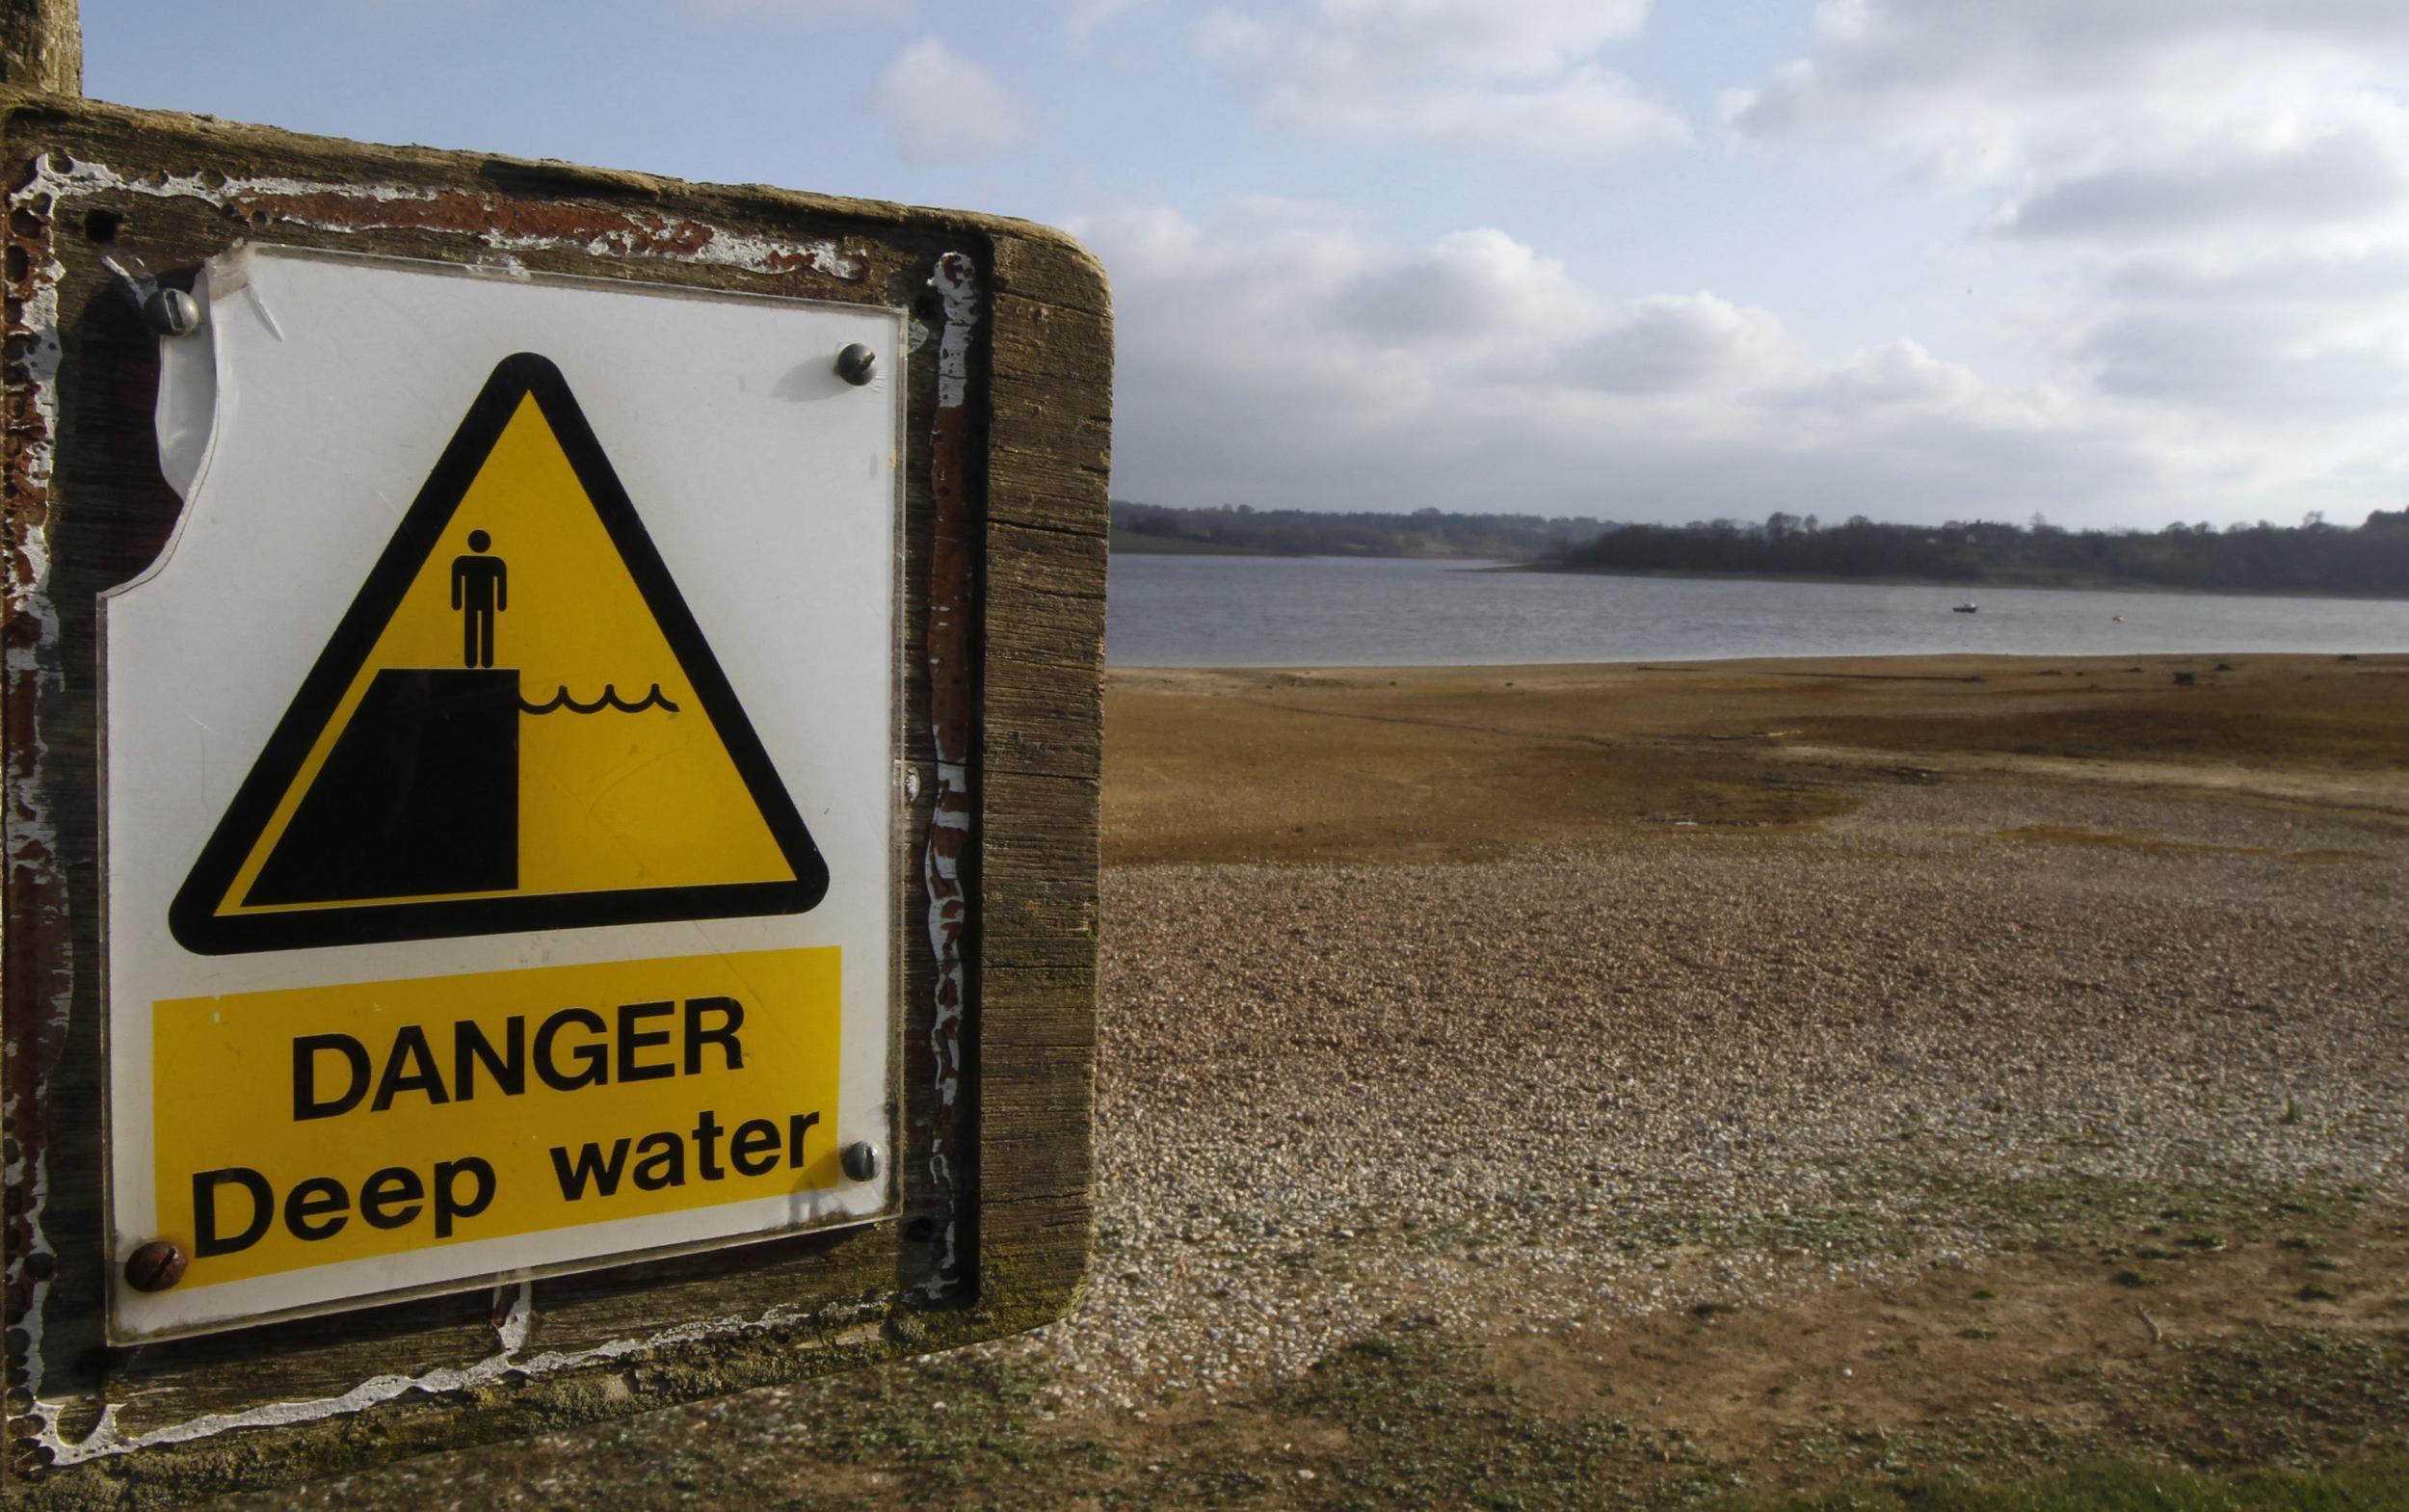 Bewl Reservoir near Lamberhurst in 2012 following one of the driest two-year periods on record in Britain